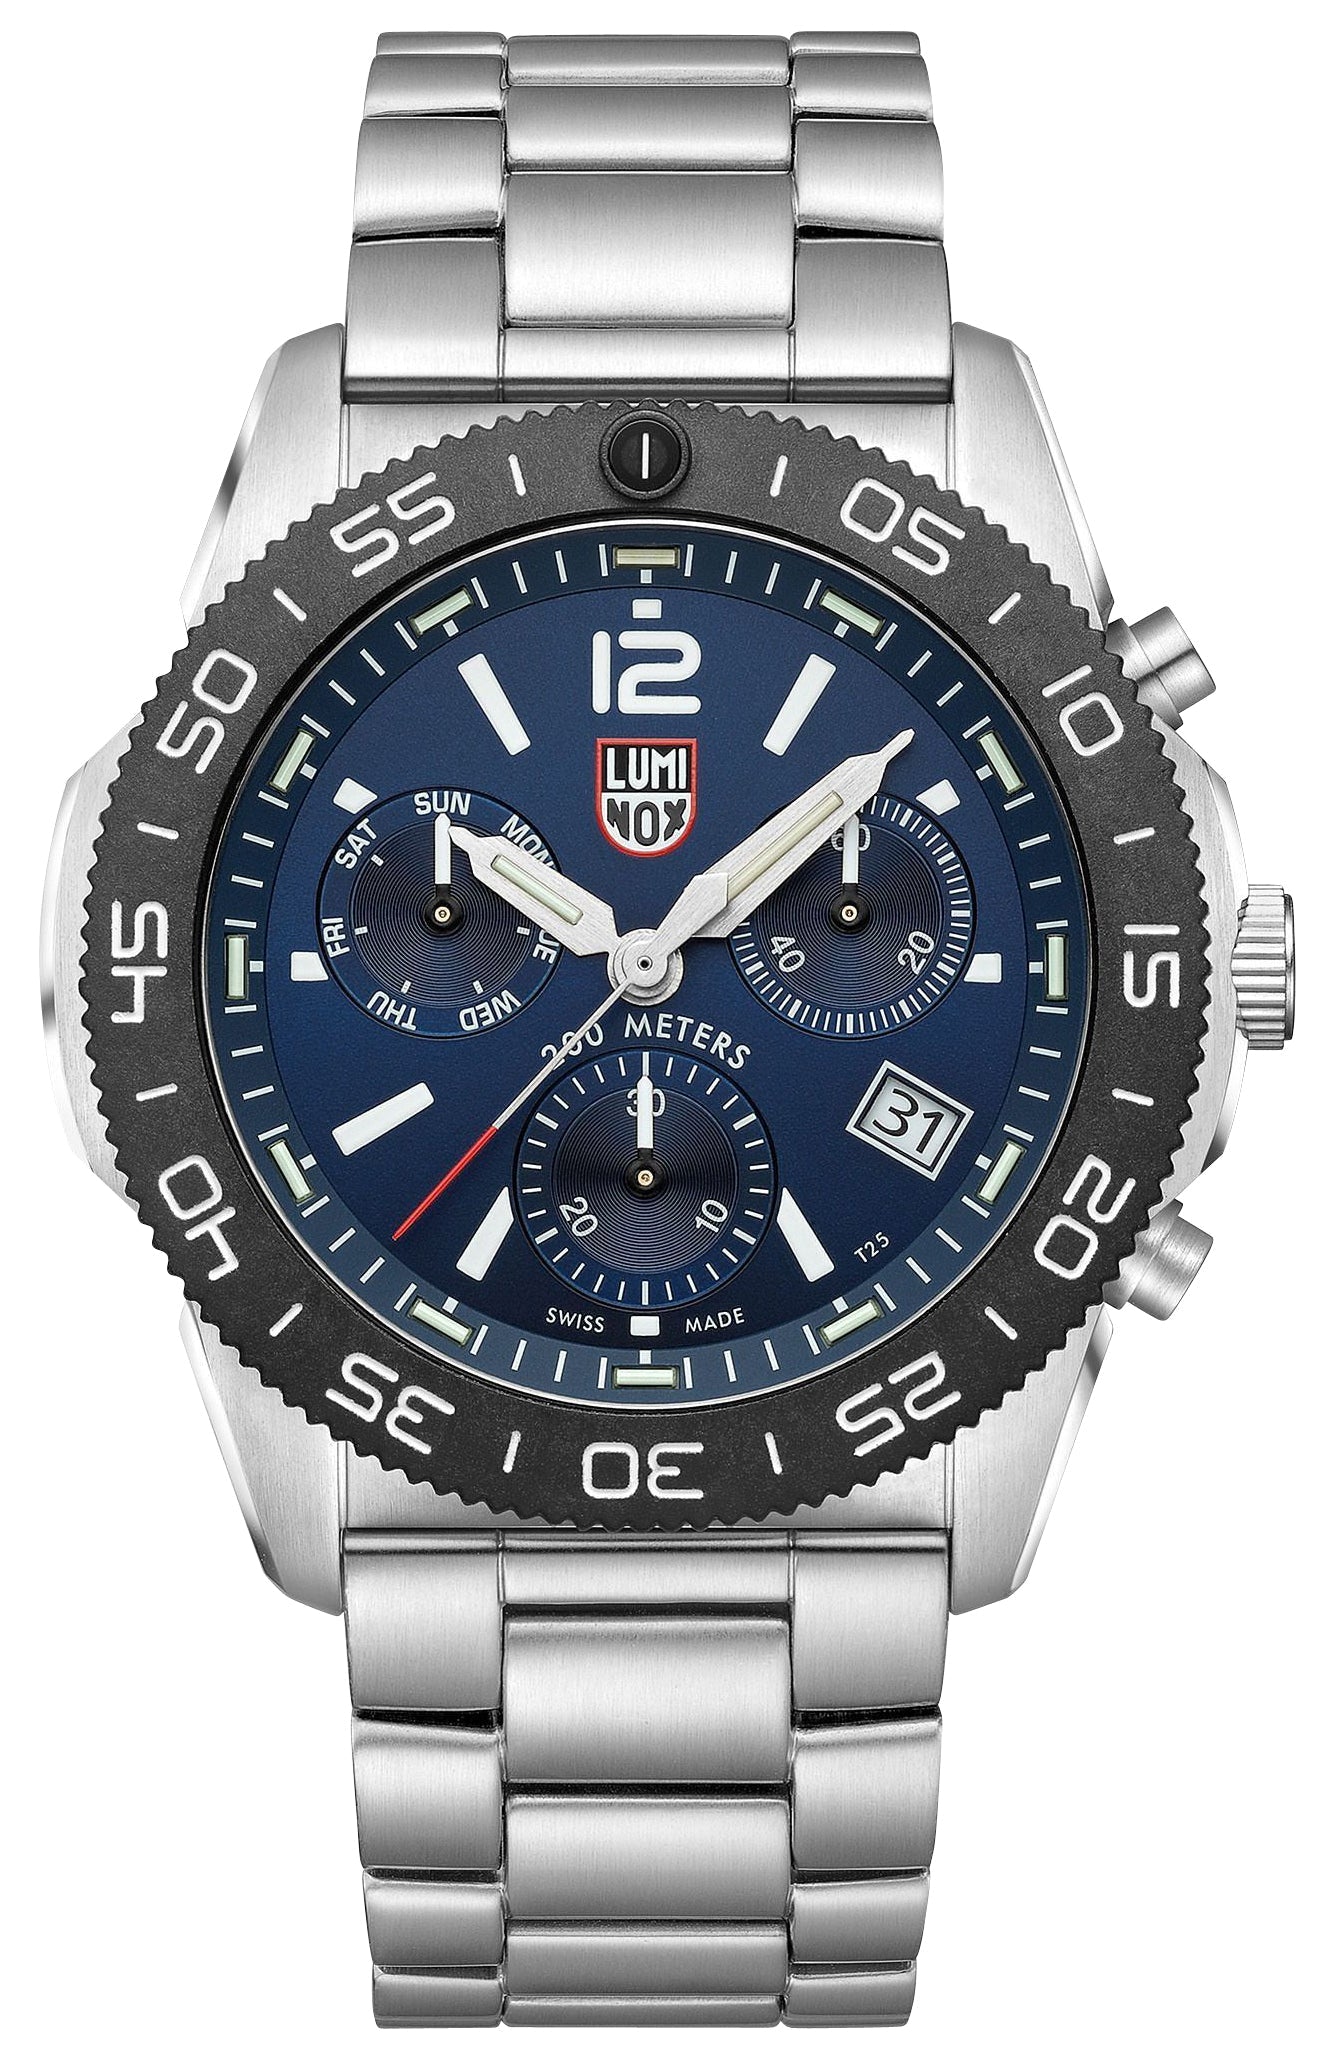 update alt-text with template Watches - Mens-Luminox-XS.3144-40 - 45 mm, blue, chronograph, date, day, divers, glow in the dark, Luminox, mens, menswatches, new arrivals, Pacific Diver, round, rpSKU_XB.3741, rpSKU_XB.3743.ECO, rpSKU_XB.3745, rpSKU_XB.3757.ECO, rpSKU_XS.3142, seconds sub-dial, stainless steel band, stainless steel case, swiss quartz, uni-directional rotating bezel, watches-Watches & Beyond